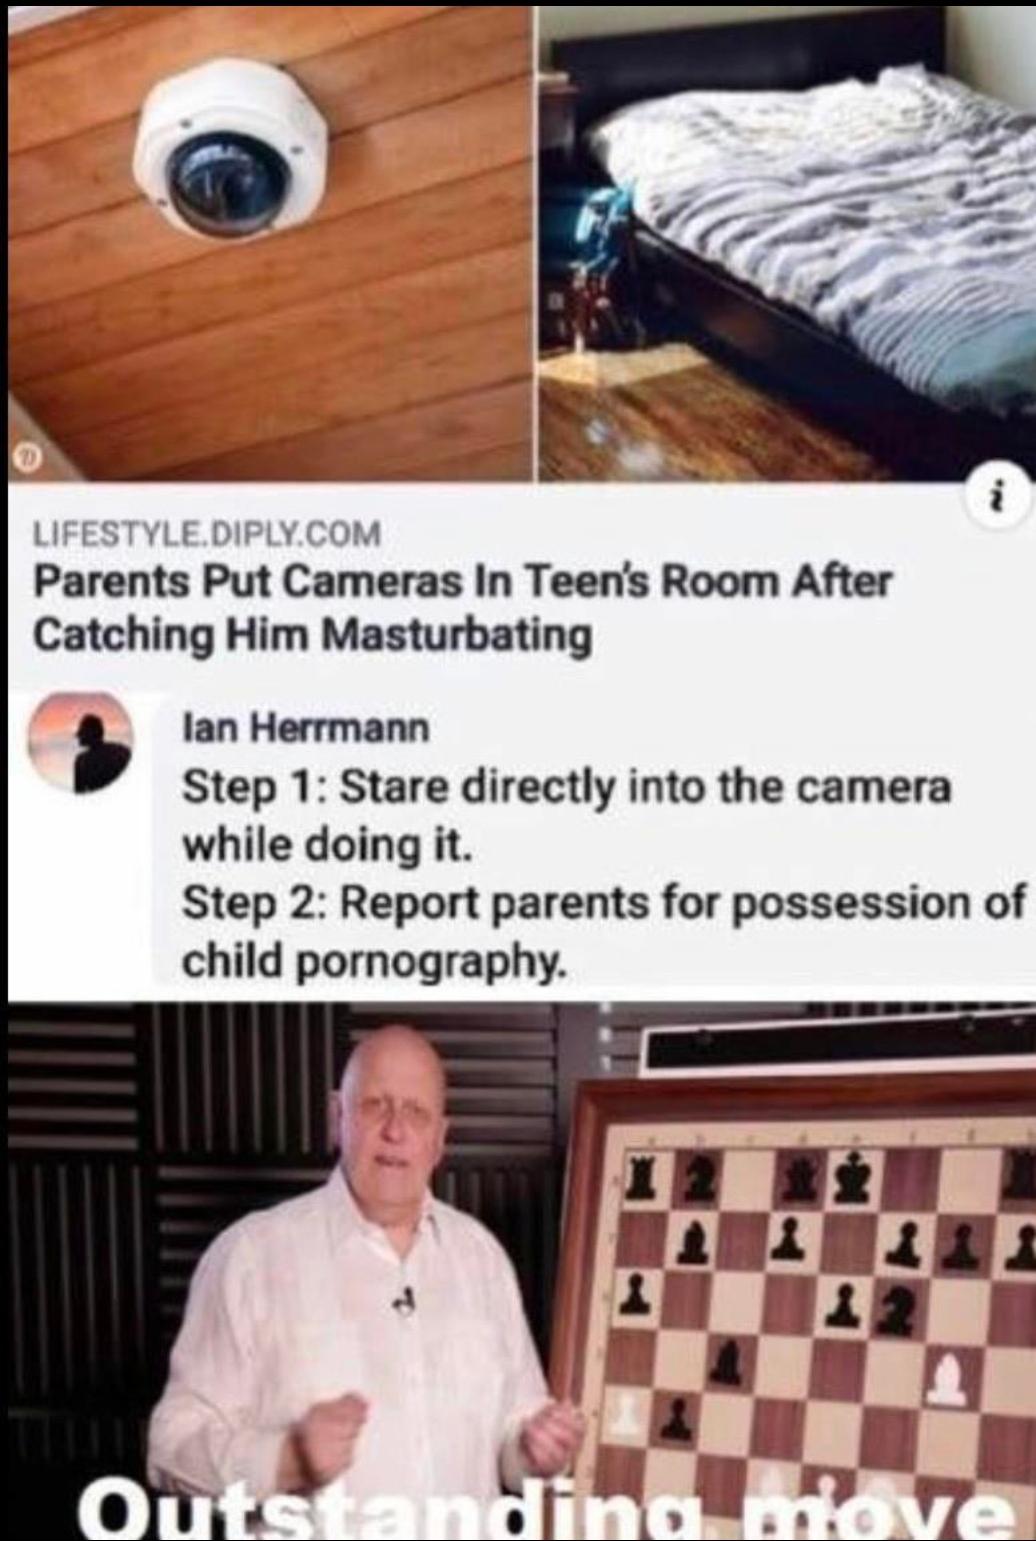 Lifestyle.Diply.Com Parents Put Cameras In Teen's Room After Catching Him Masturbating lan Herrmann Step 1 Stare directly into the camera while doing it. Step 2 Report parents for possession of child pornography. Outstandino move